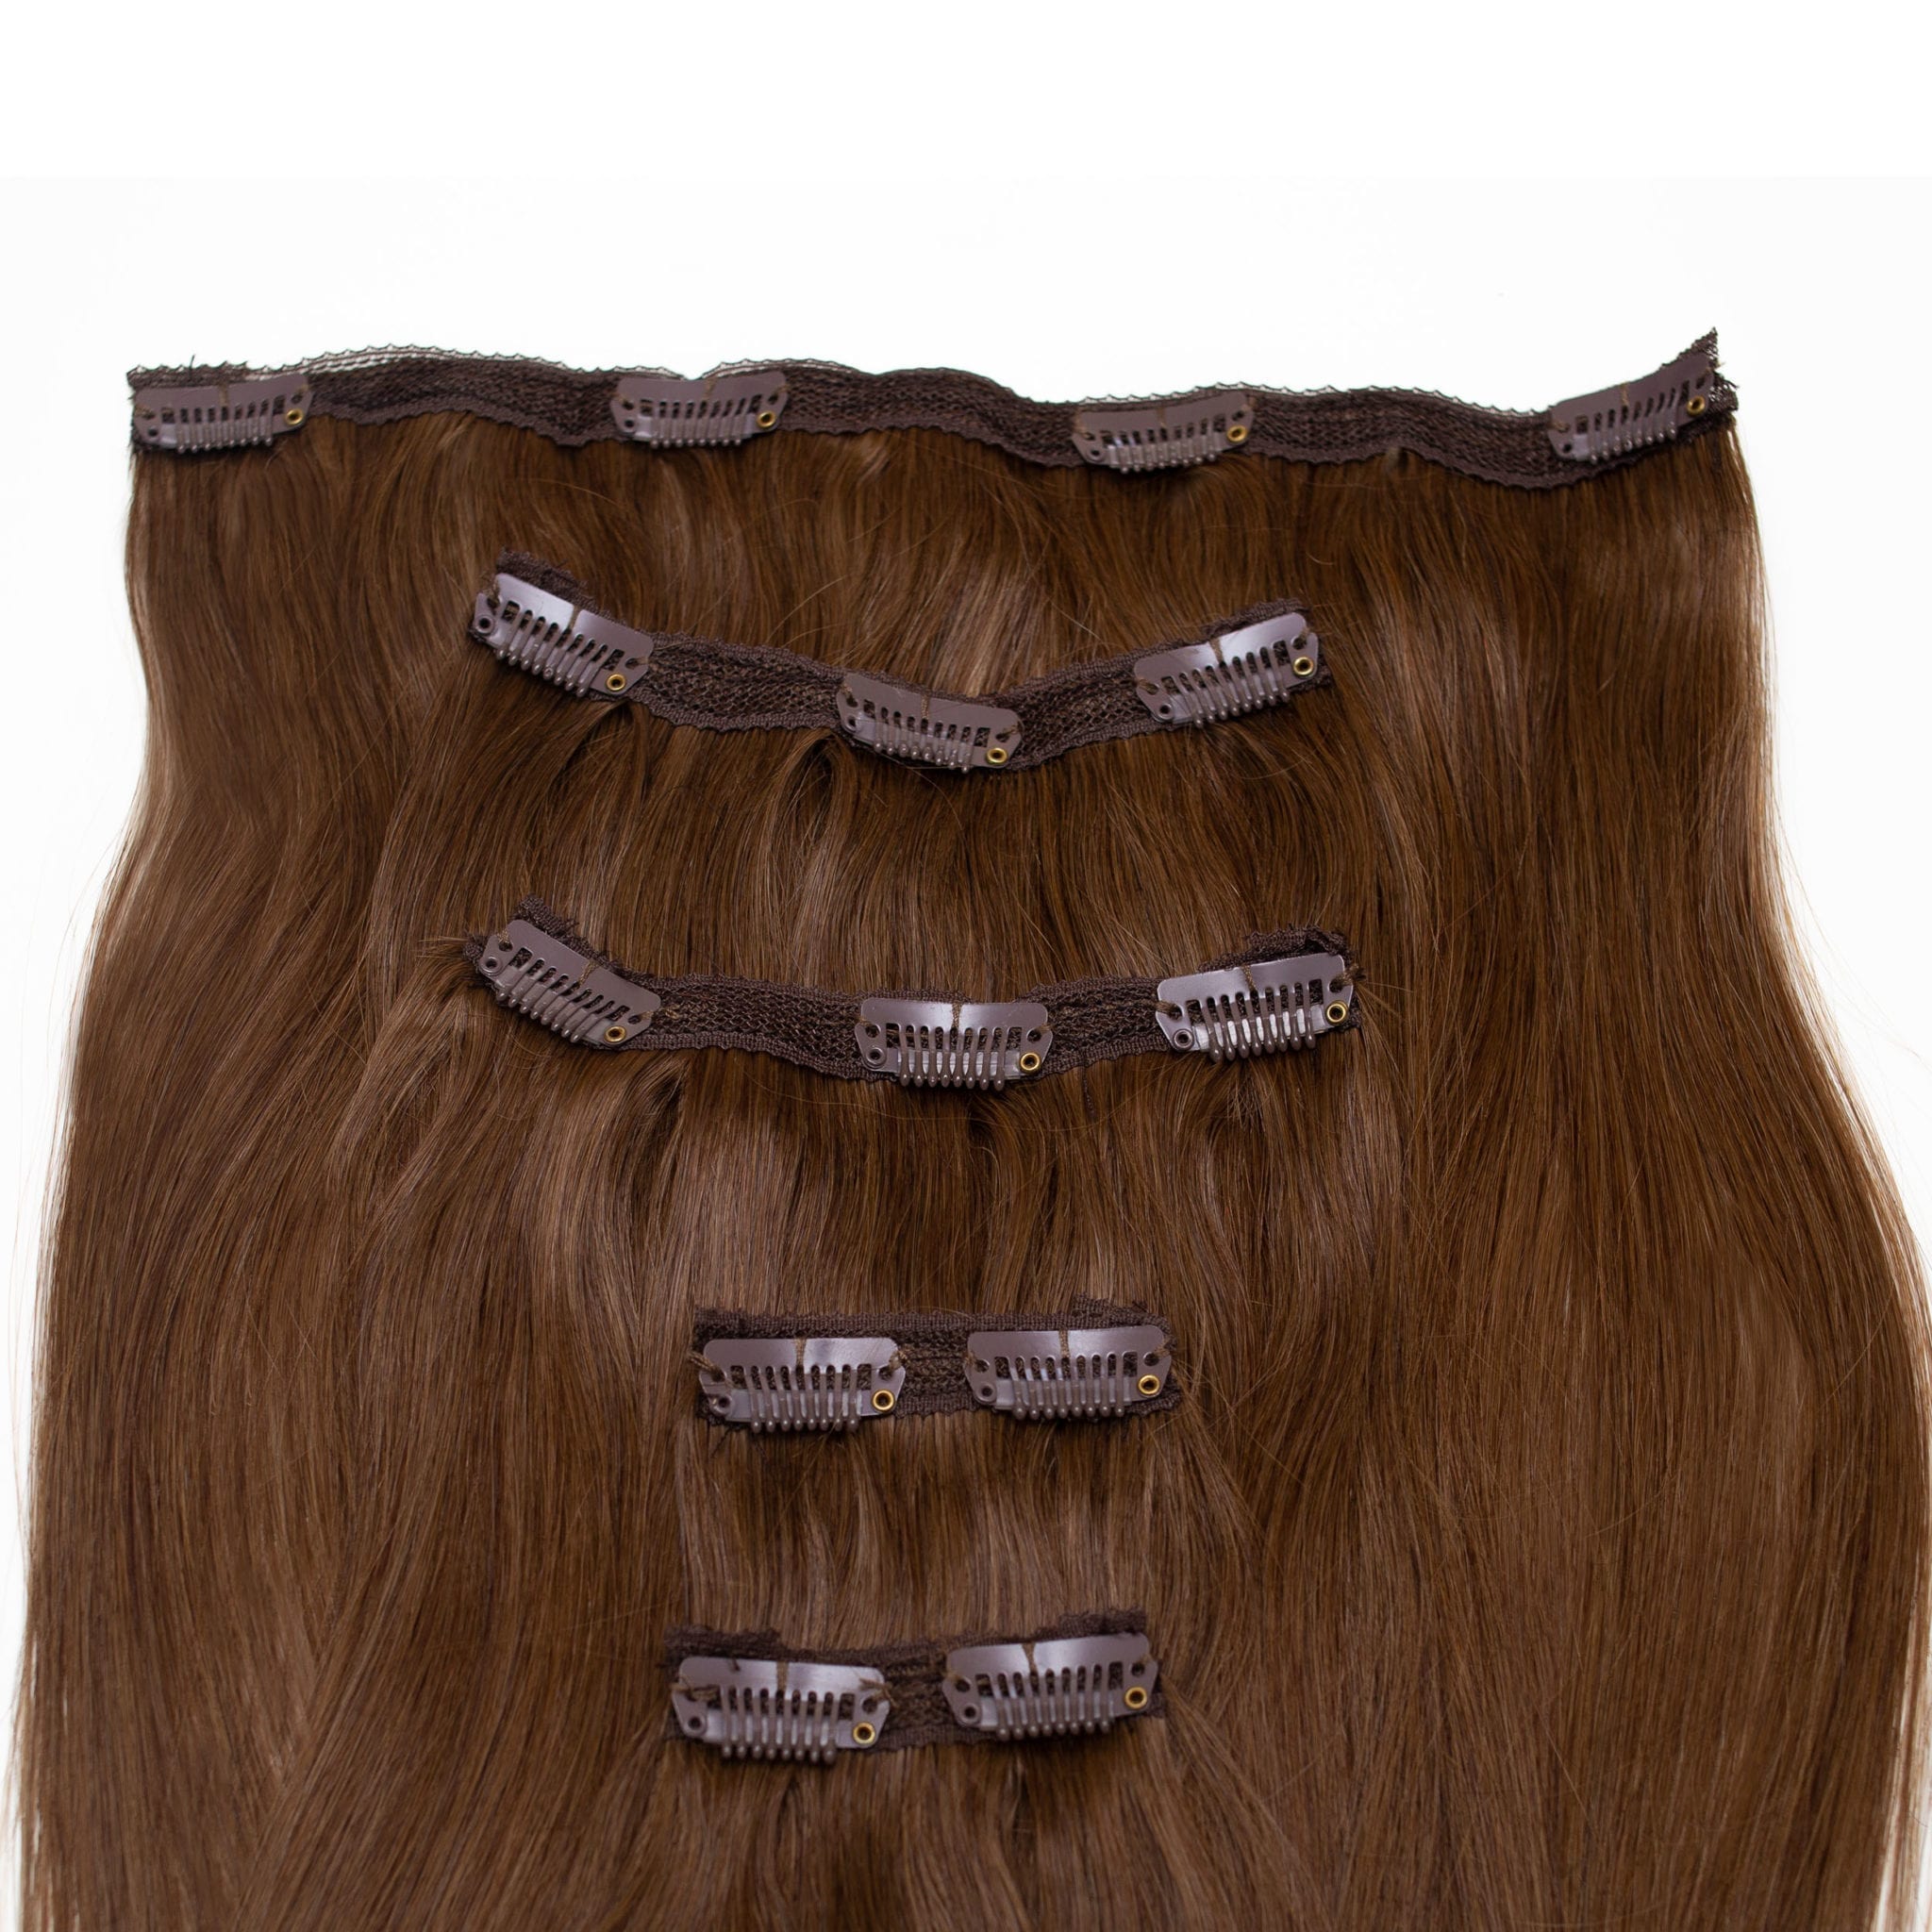 Mocha Human Hair Extensions Clip in 5 Piece – Seamless1